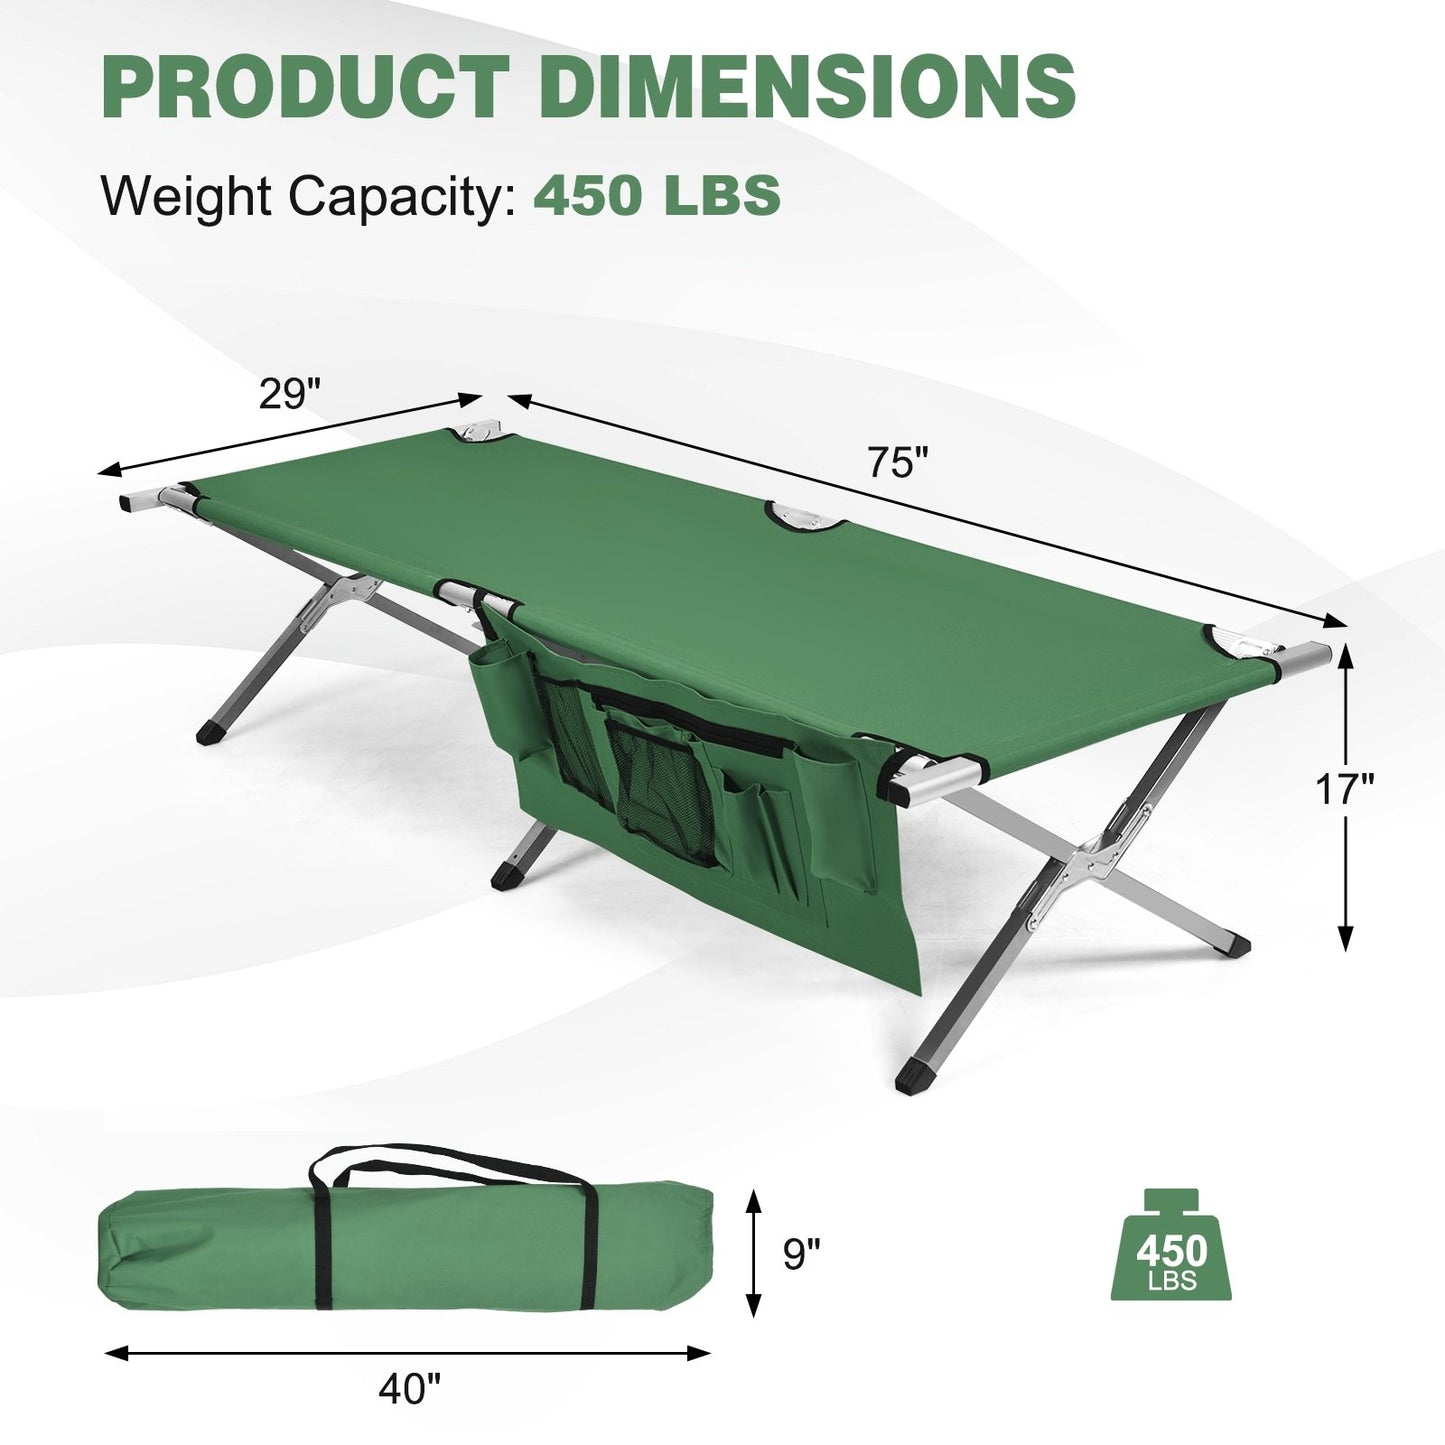 Folding Camping Cot Heavy-duty Camp Bed with Carry Bag, Green